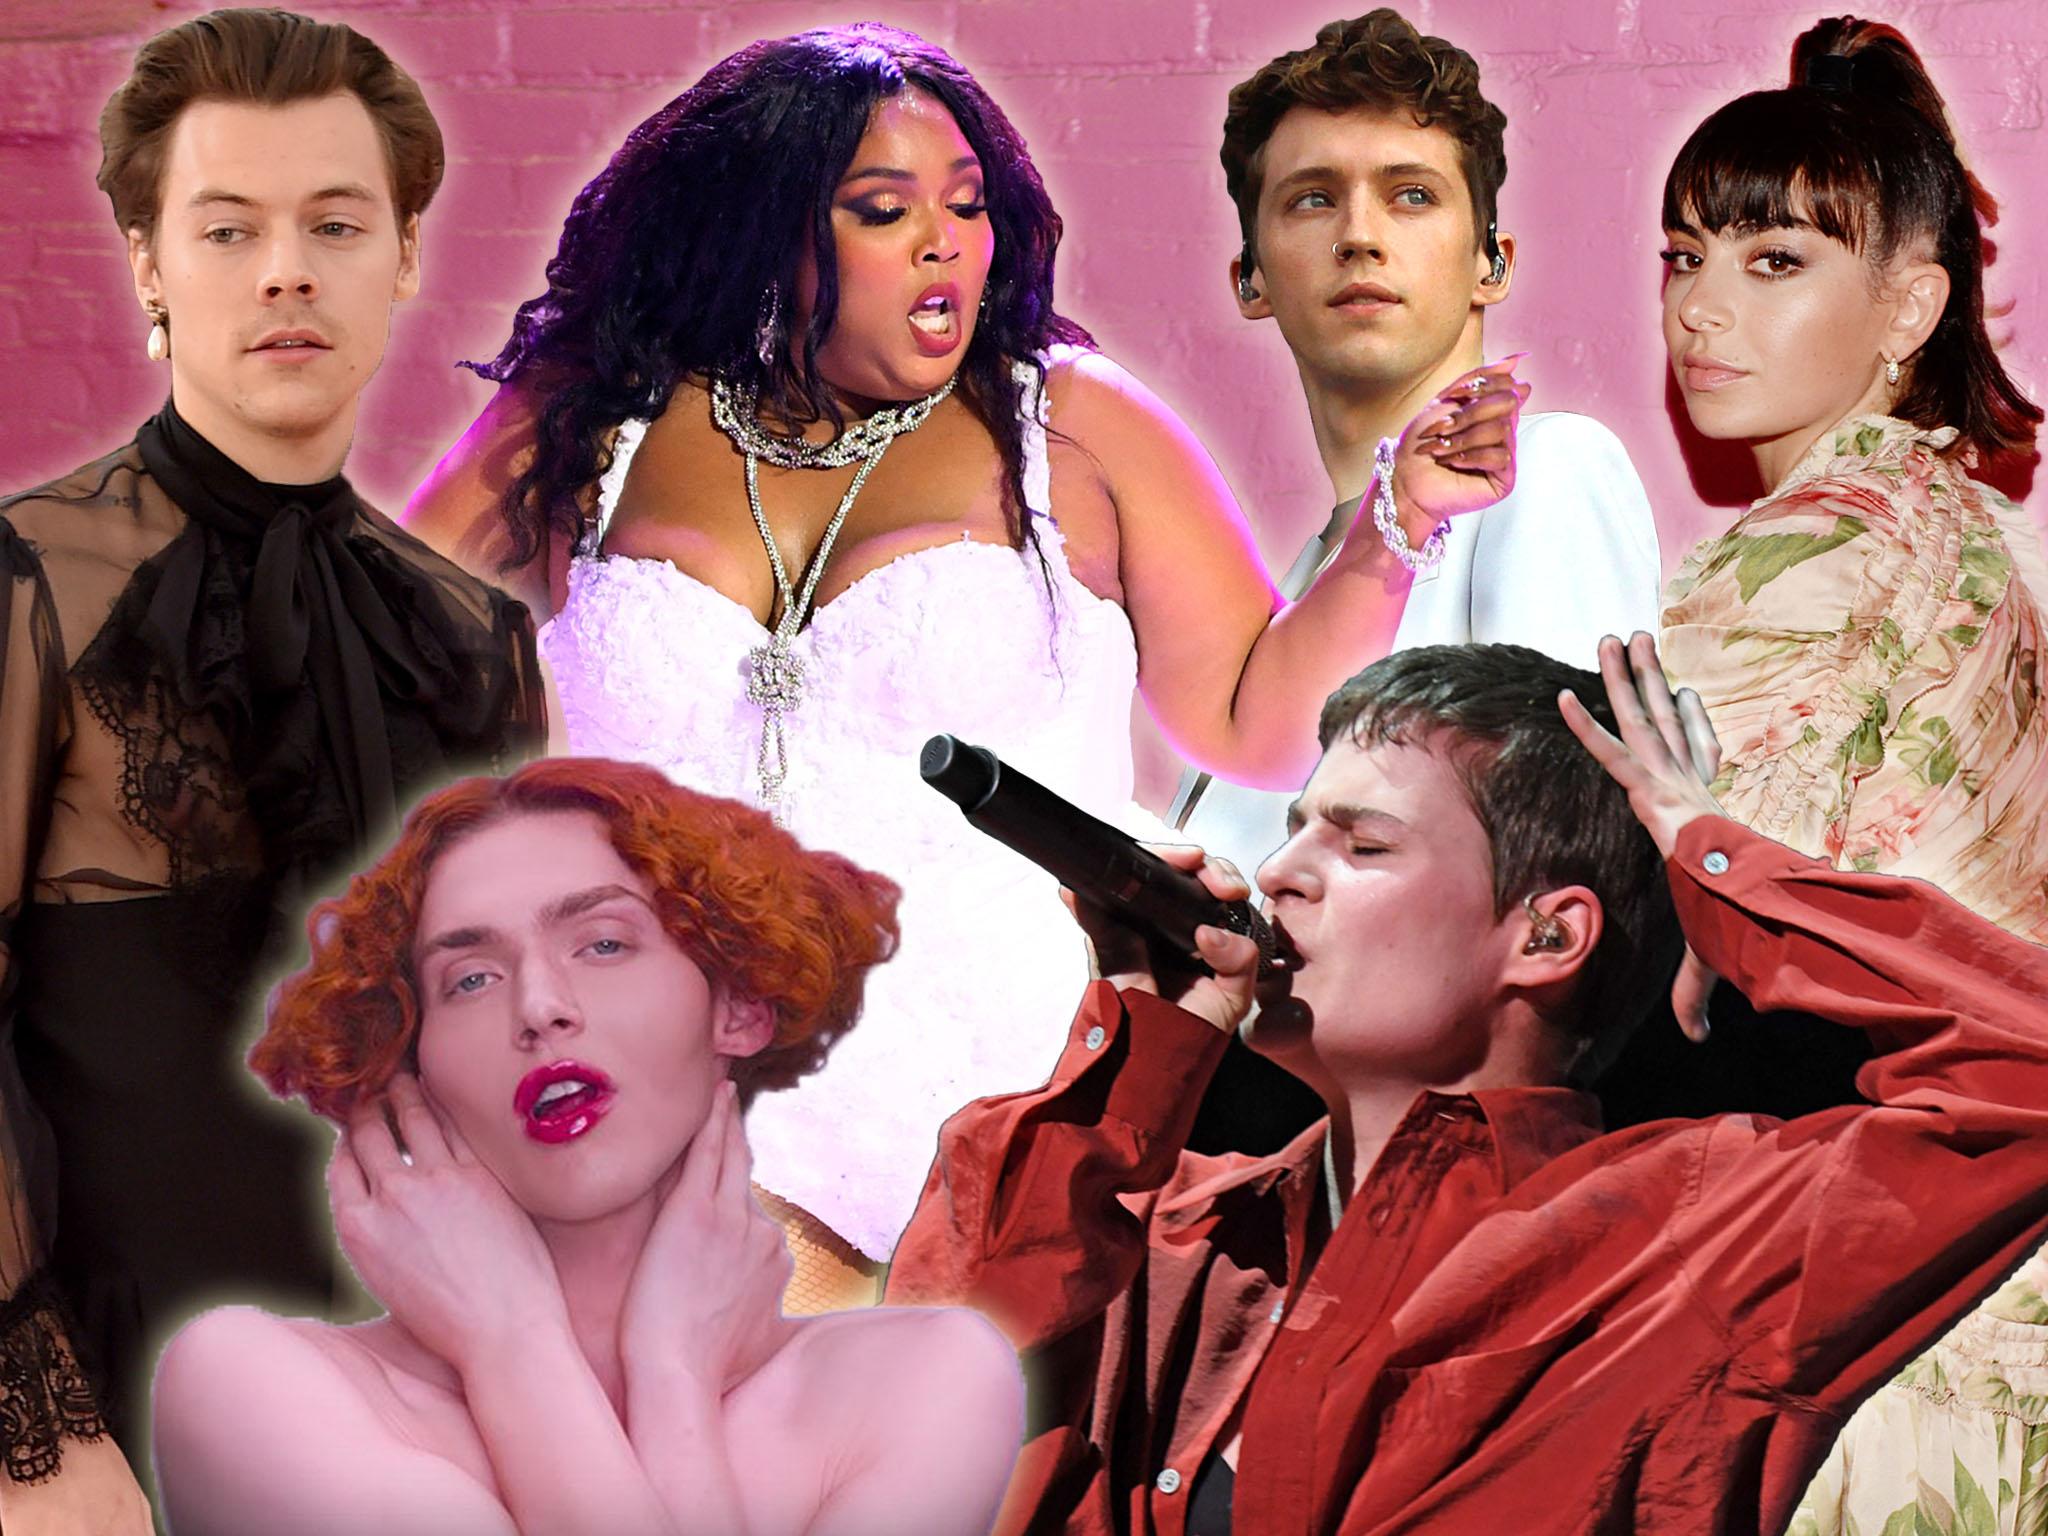 Clockwise from top: Harry Styles, Lizzo, Troye Sivan, Charli XCX, Christine and the Queens, and SOPHIE